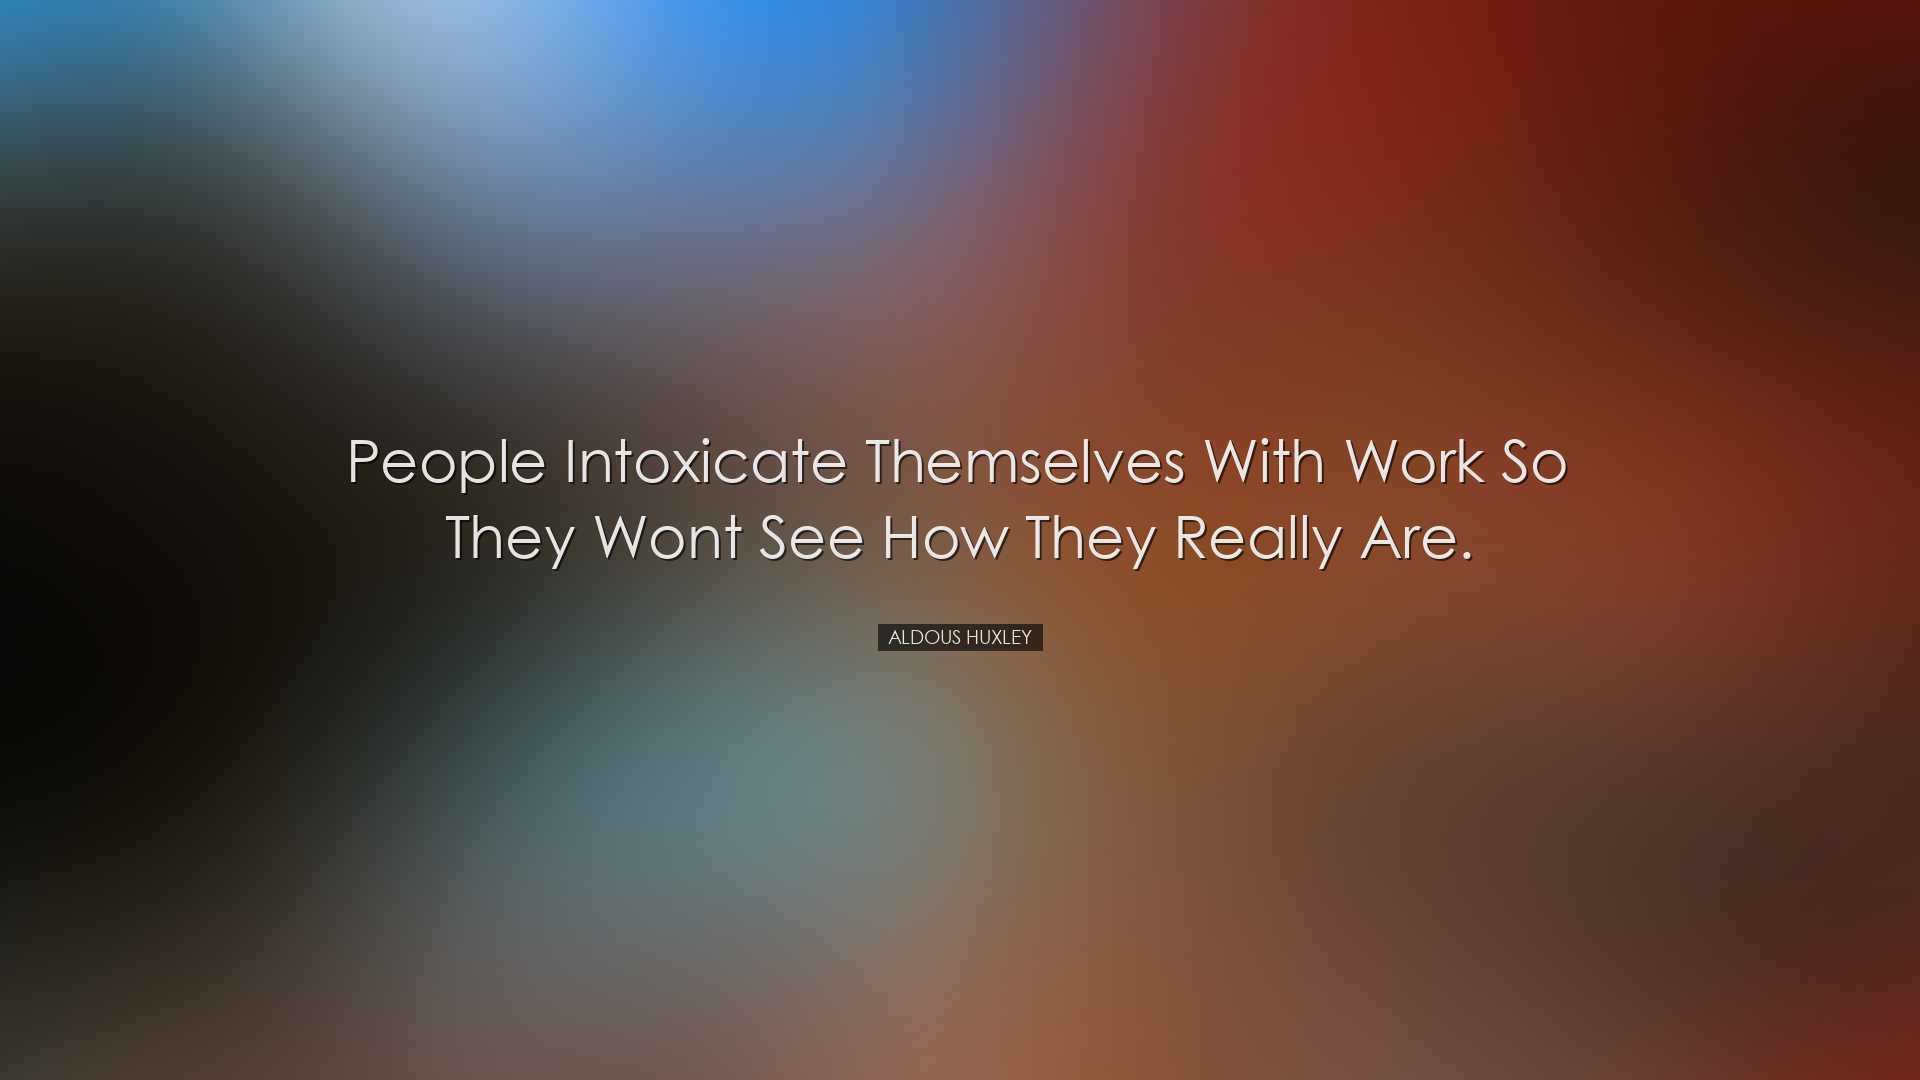 People intoxicate themselves with work so they wont see how they r